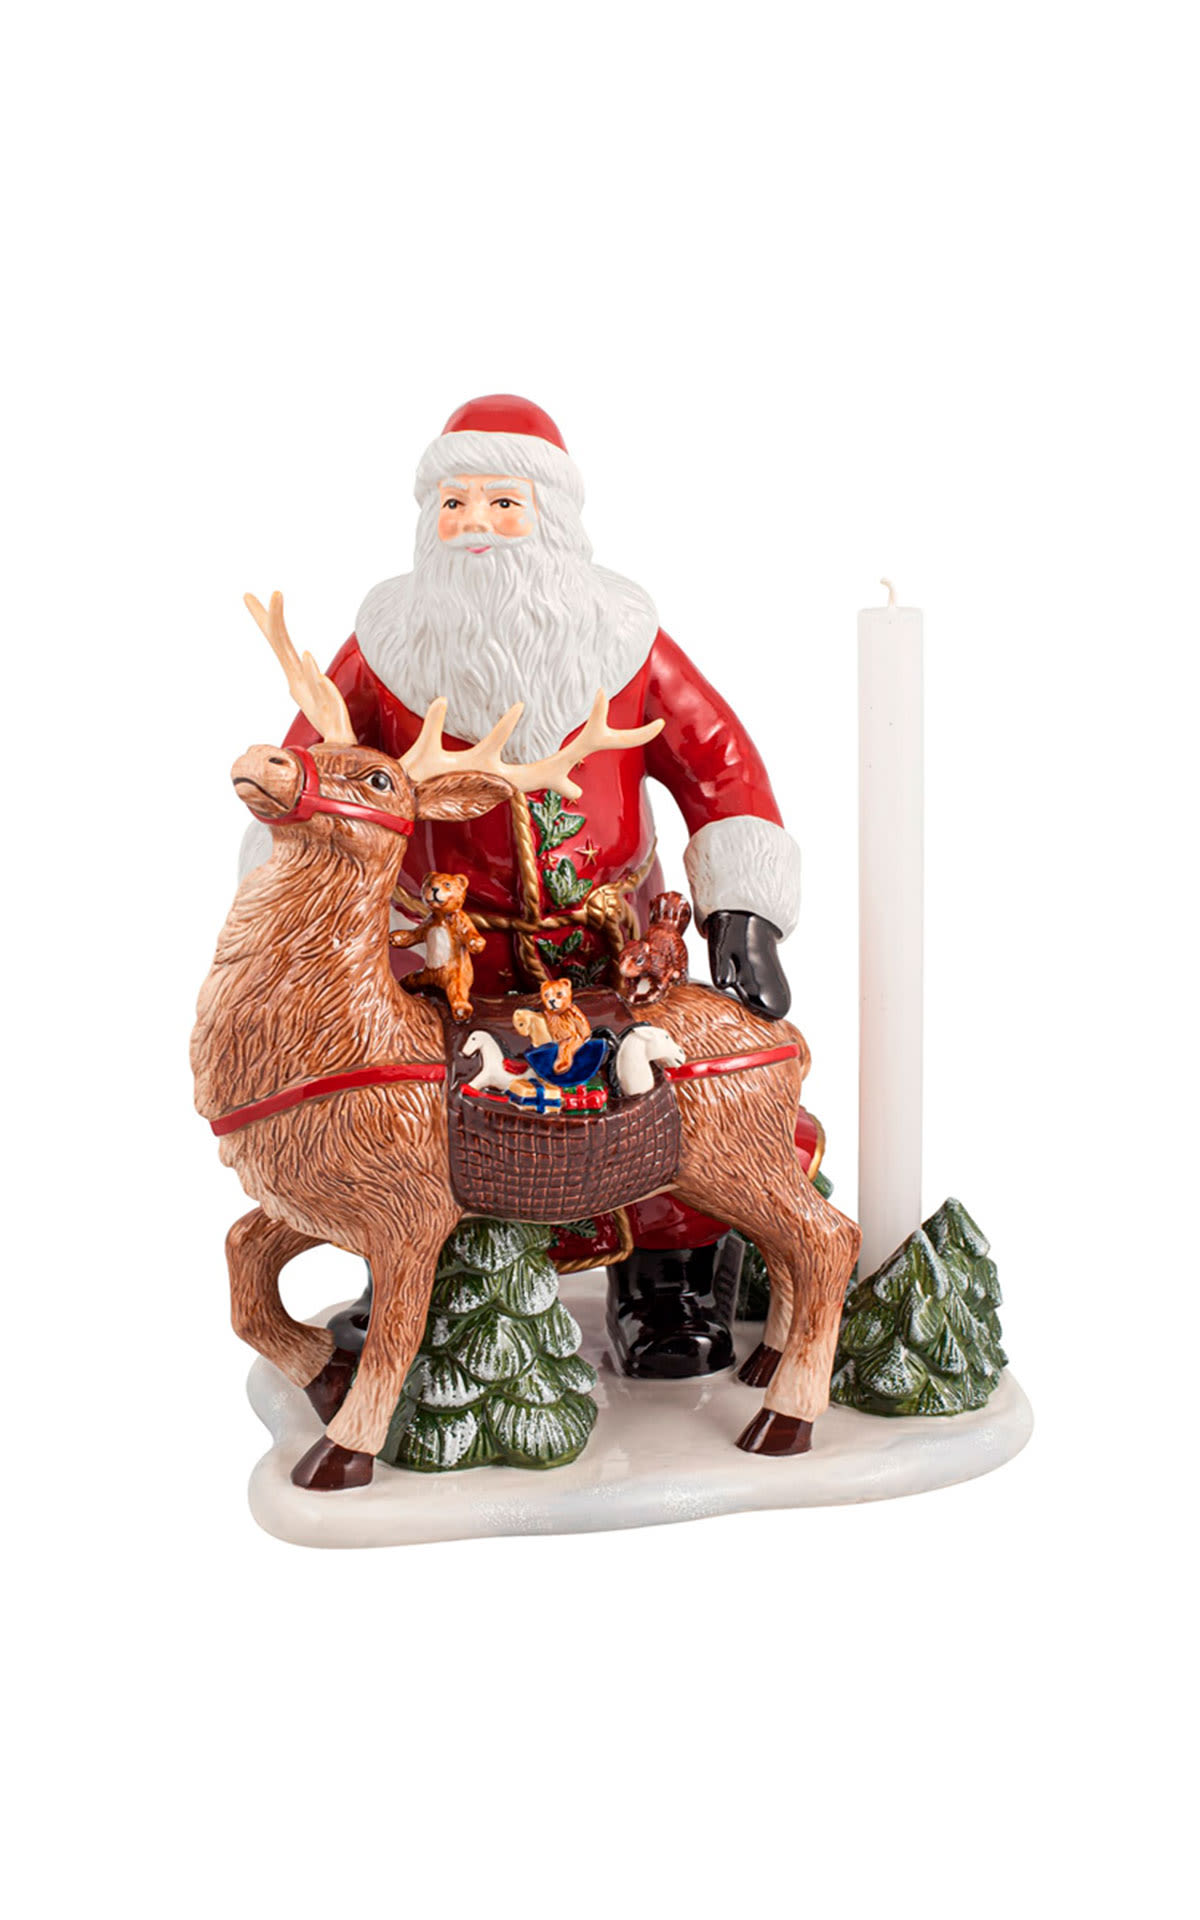 Statue of Santa Claus with a reindeer decoration Villeroy & Boch